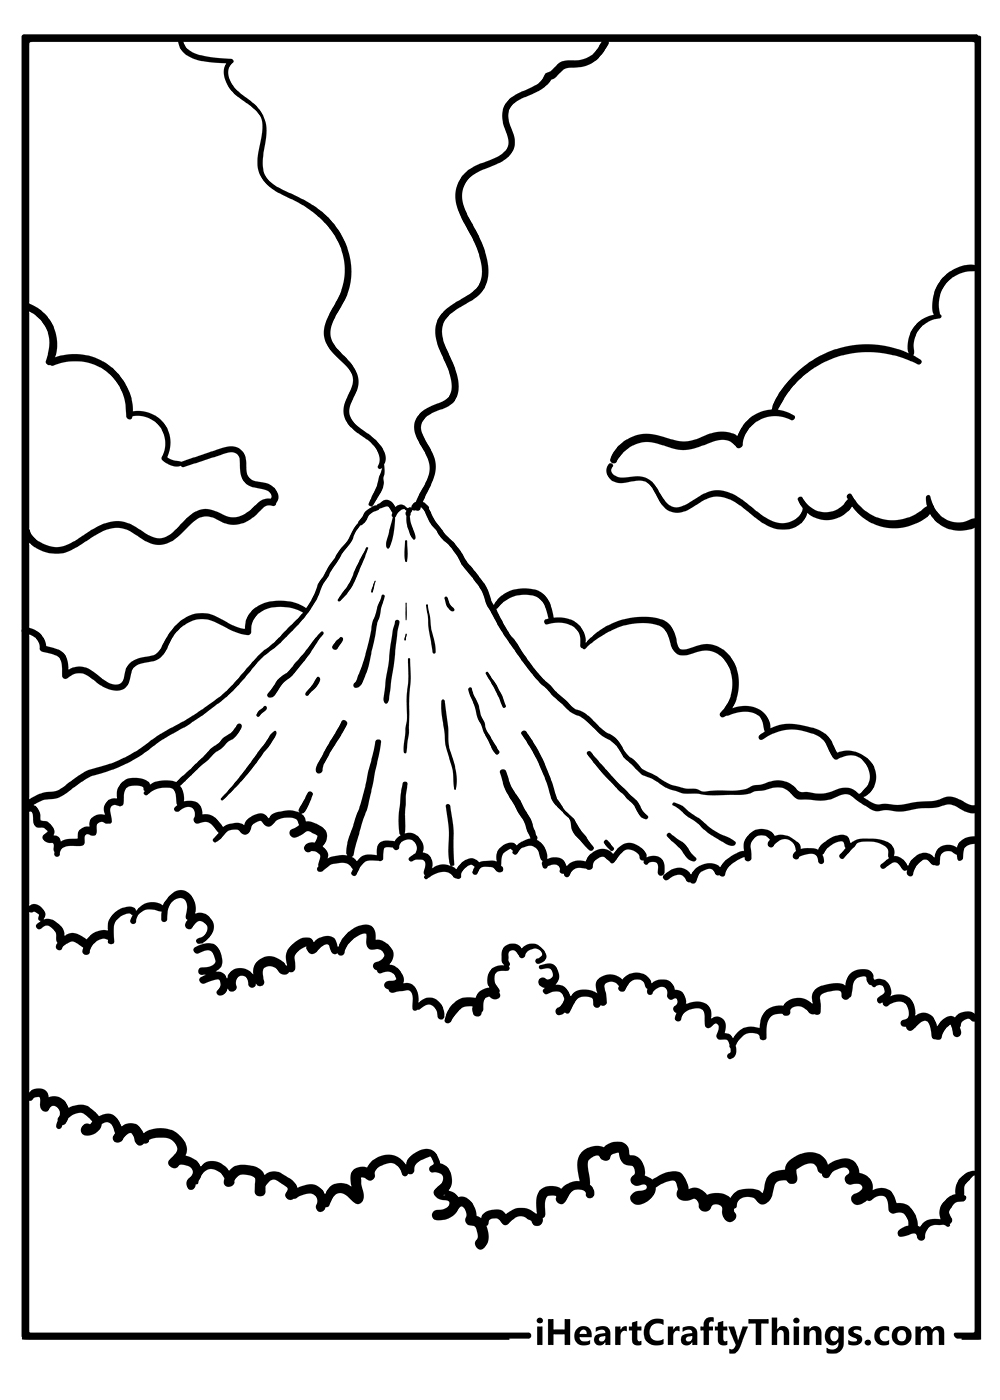 Volcano Coloring Book for kids free printable